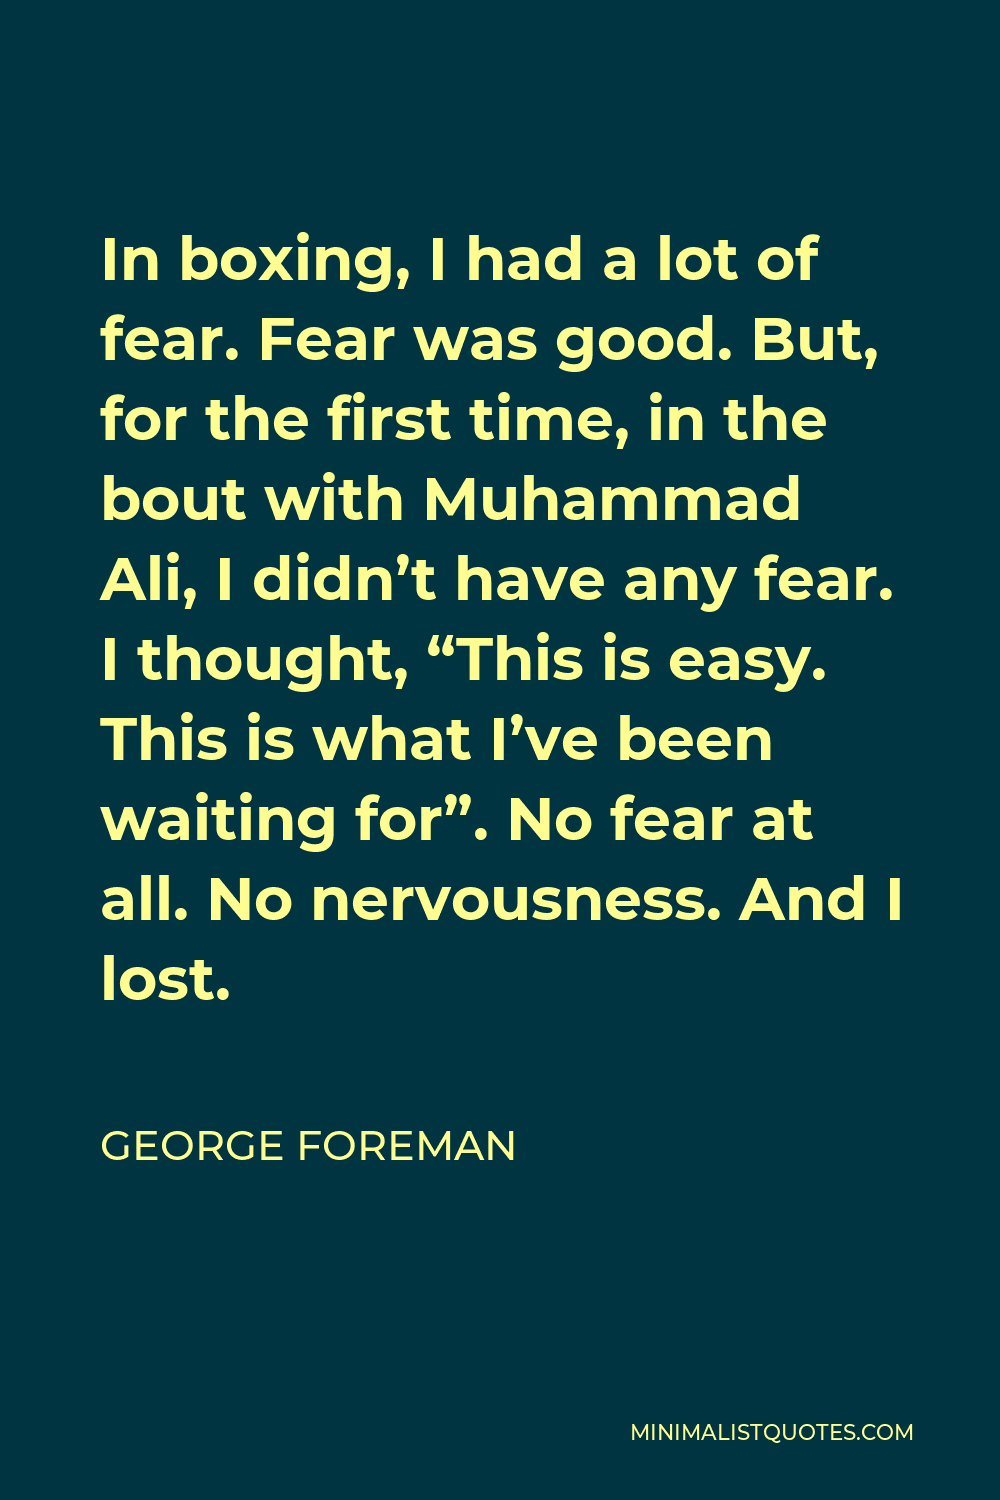 George Foreman Quote - In boxing, I had a lot of fear. Fear was good. But, for the first time, in the bout with Muhammad Ali, I didn’t have any fear. I thought, “This is easy. This is what I’ve been waiting for”. No fear at all. No nervousness. And I lost.